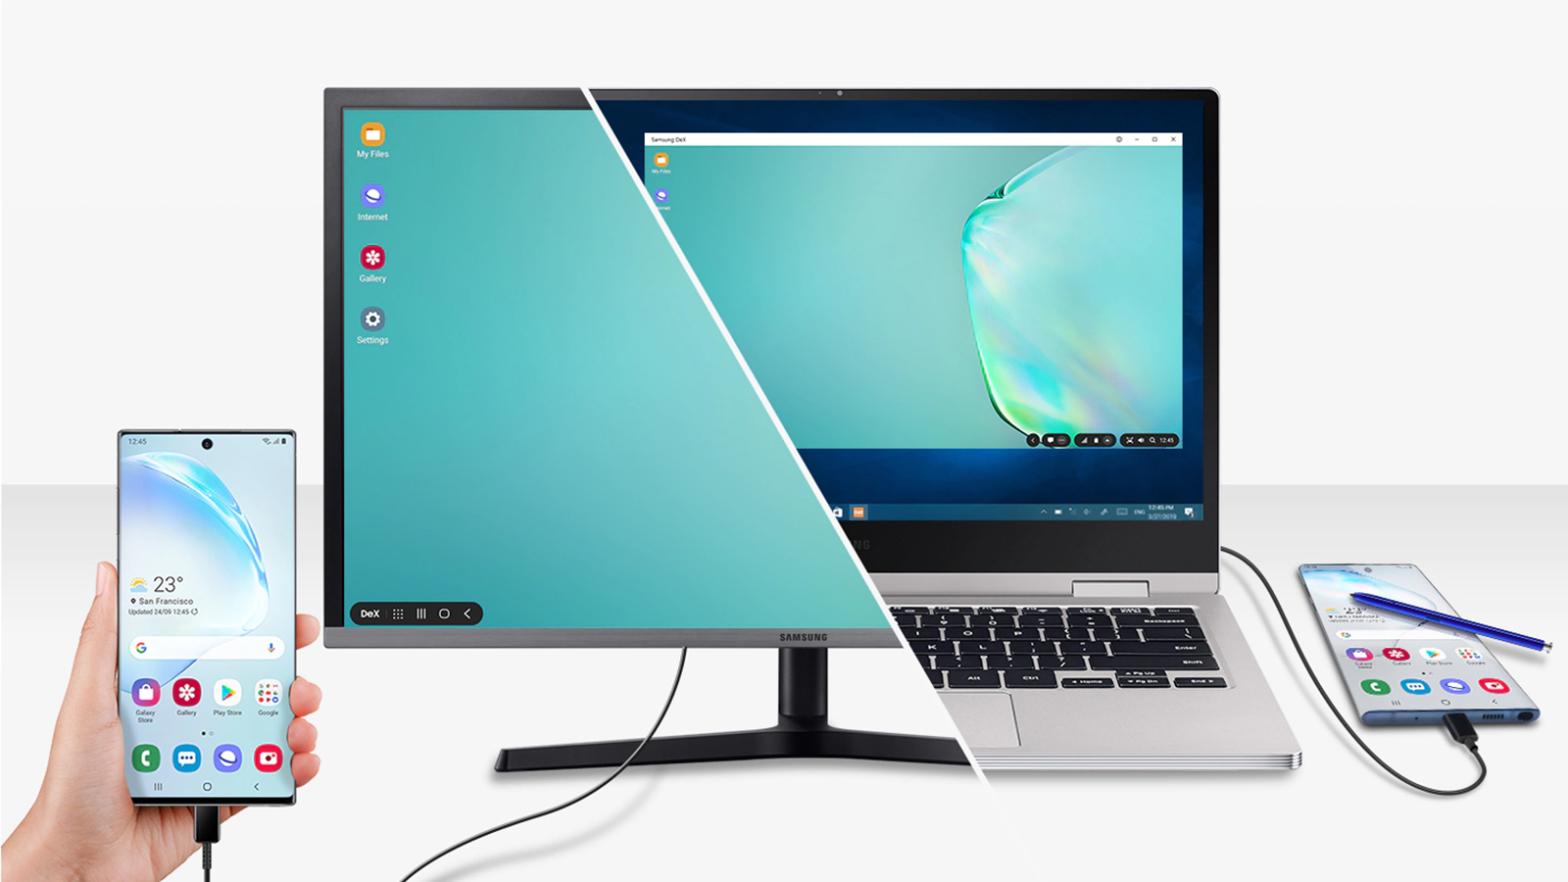 Samsung DeX works on computers, monitors, and TVs. (Image: Samsung)